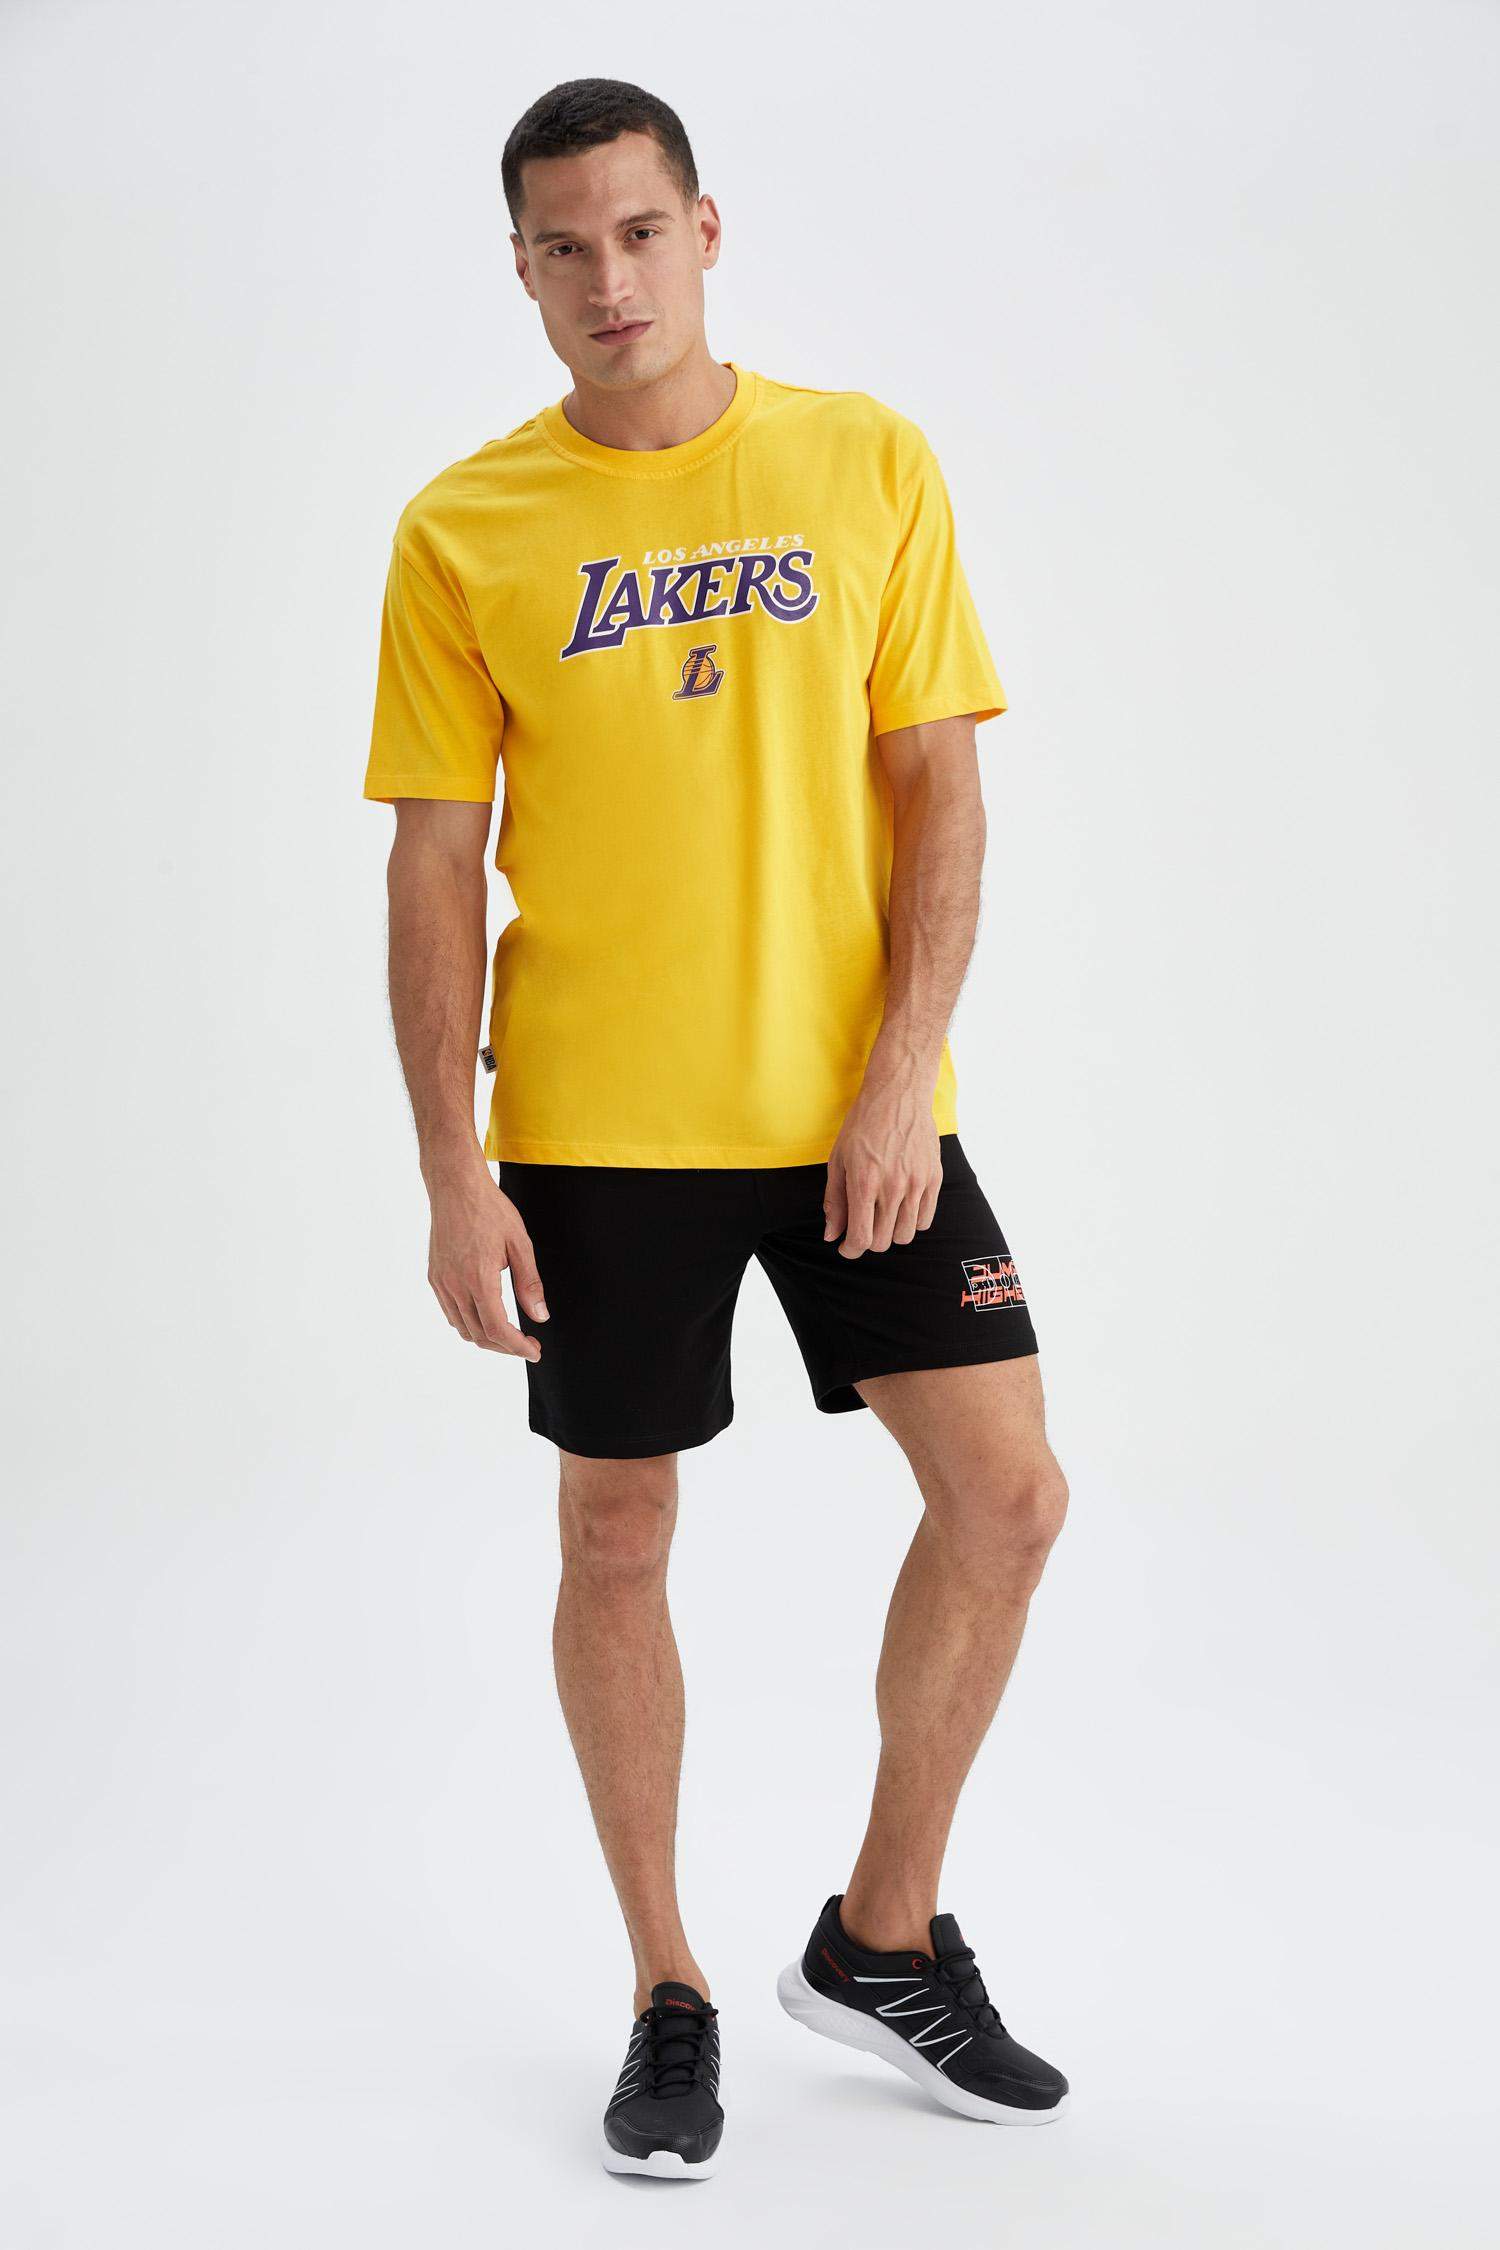 Purple MAN Defacto Fit NBA Los Angeles Lakers Licensed Oversize Fit Crew  Neck Sleeveless T-Shirt 2514304